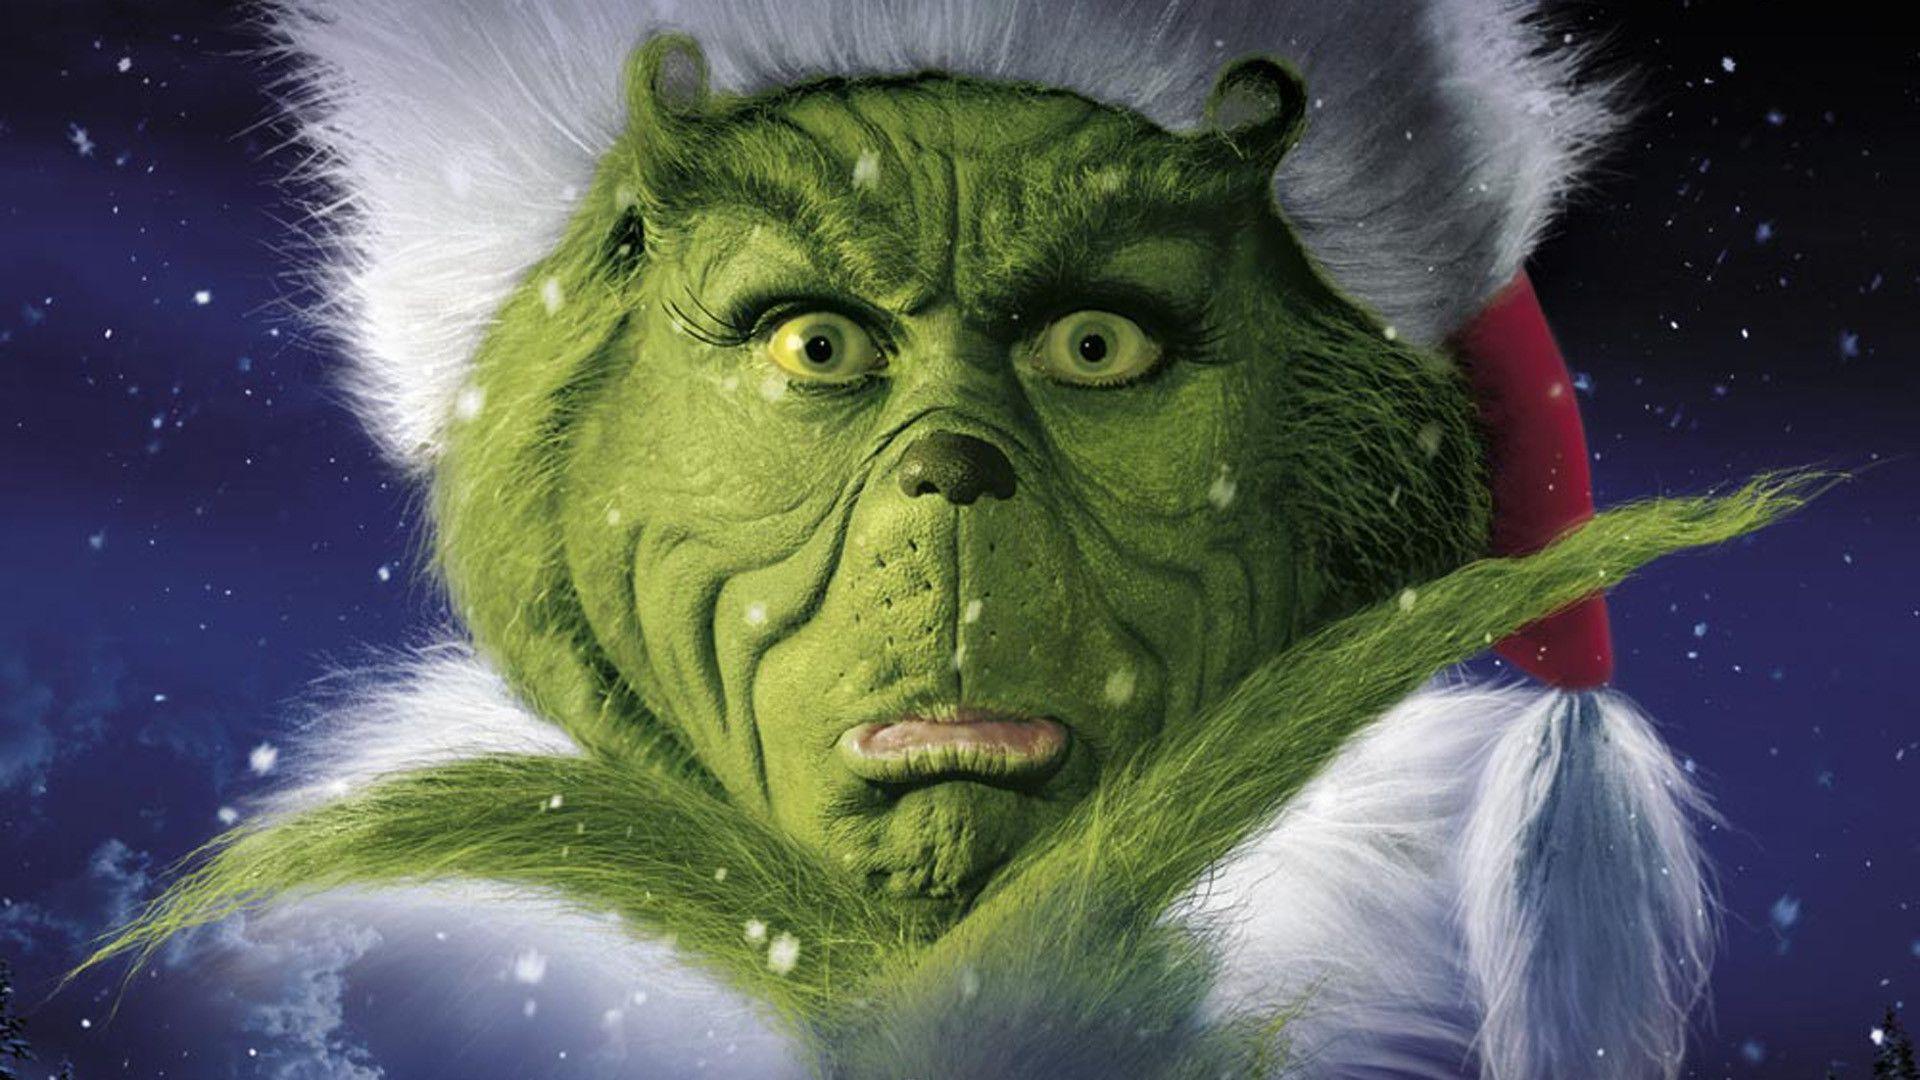 The Grinch The Grinch Stole Christmas Wallpaper 31423260